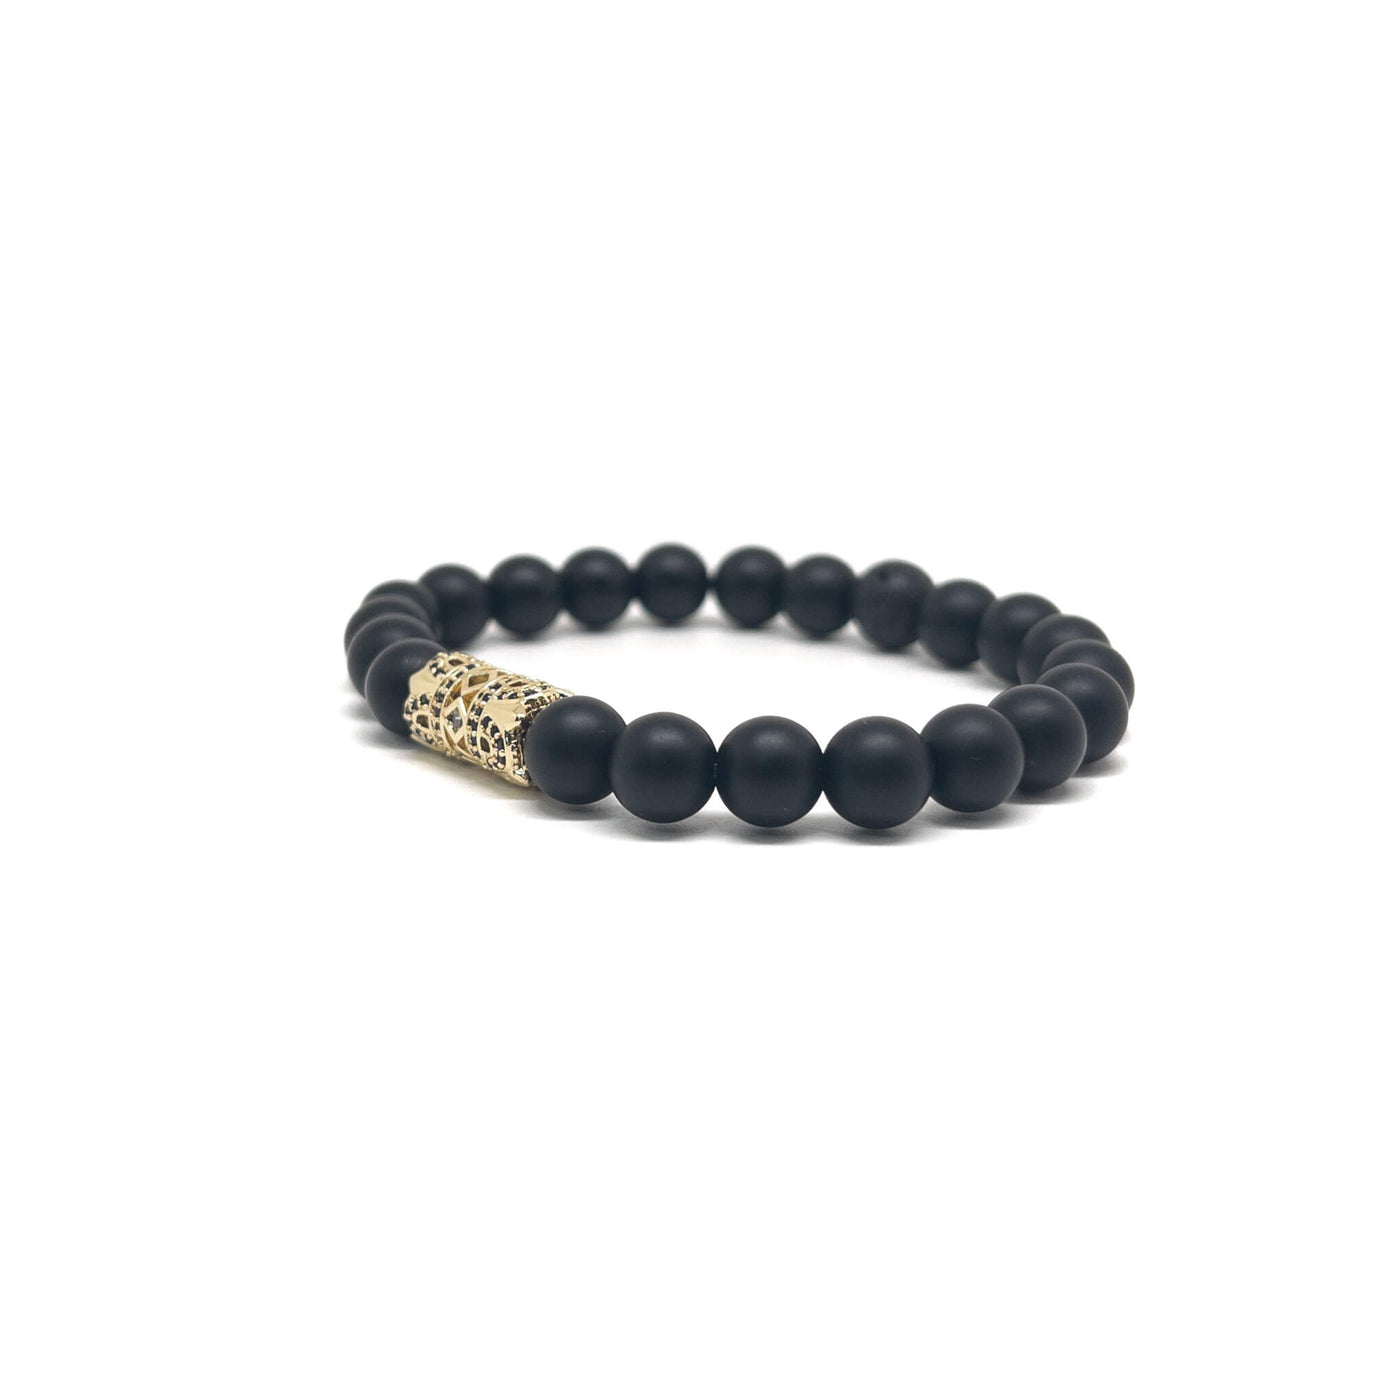 The Gold Plated Hollow and Onyx Stones bracelet